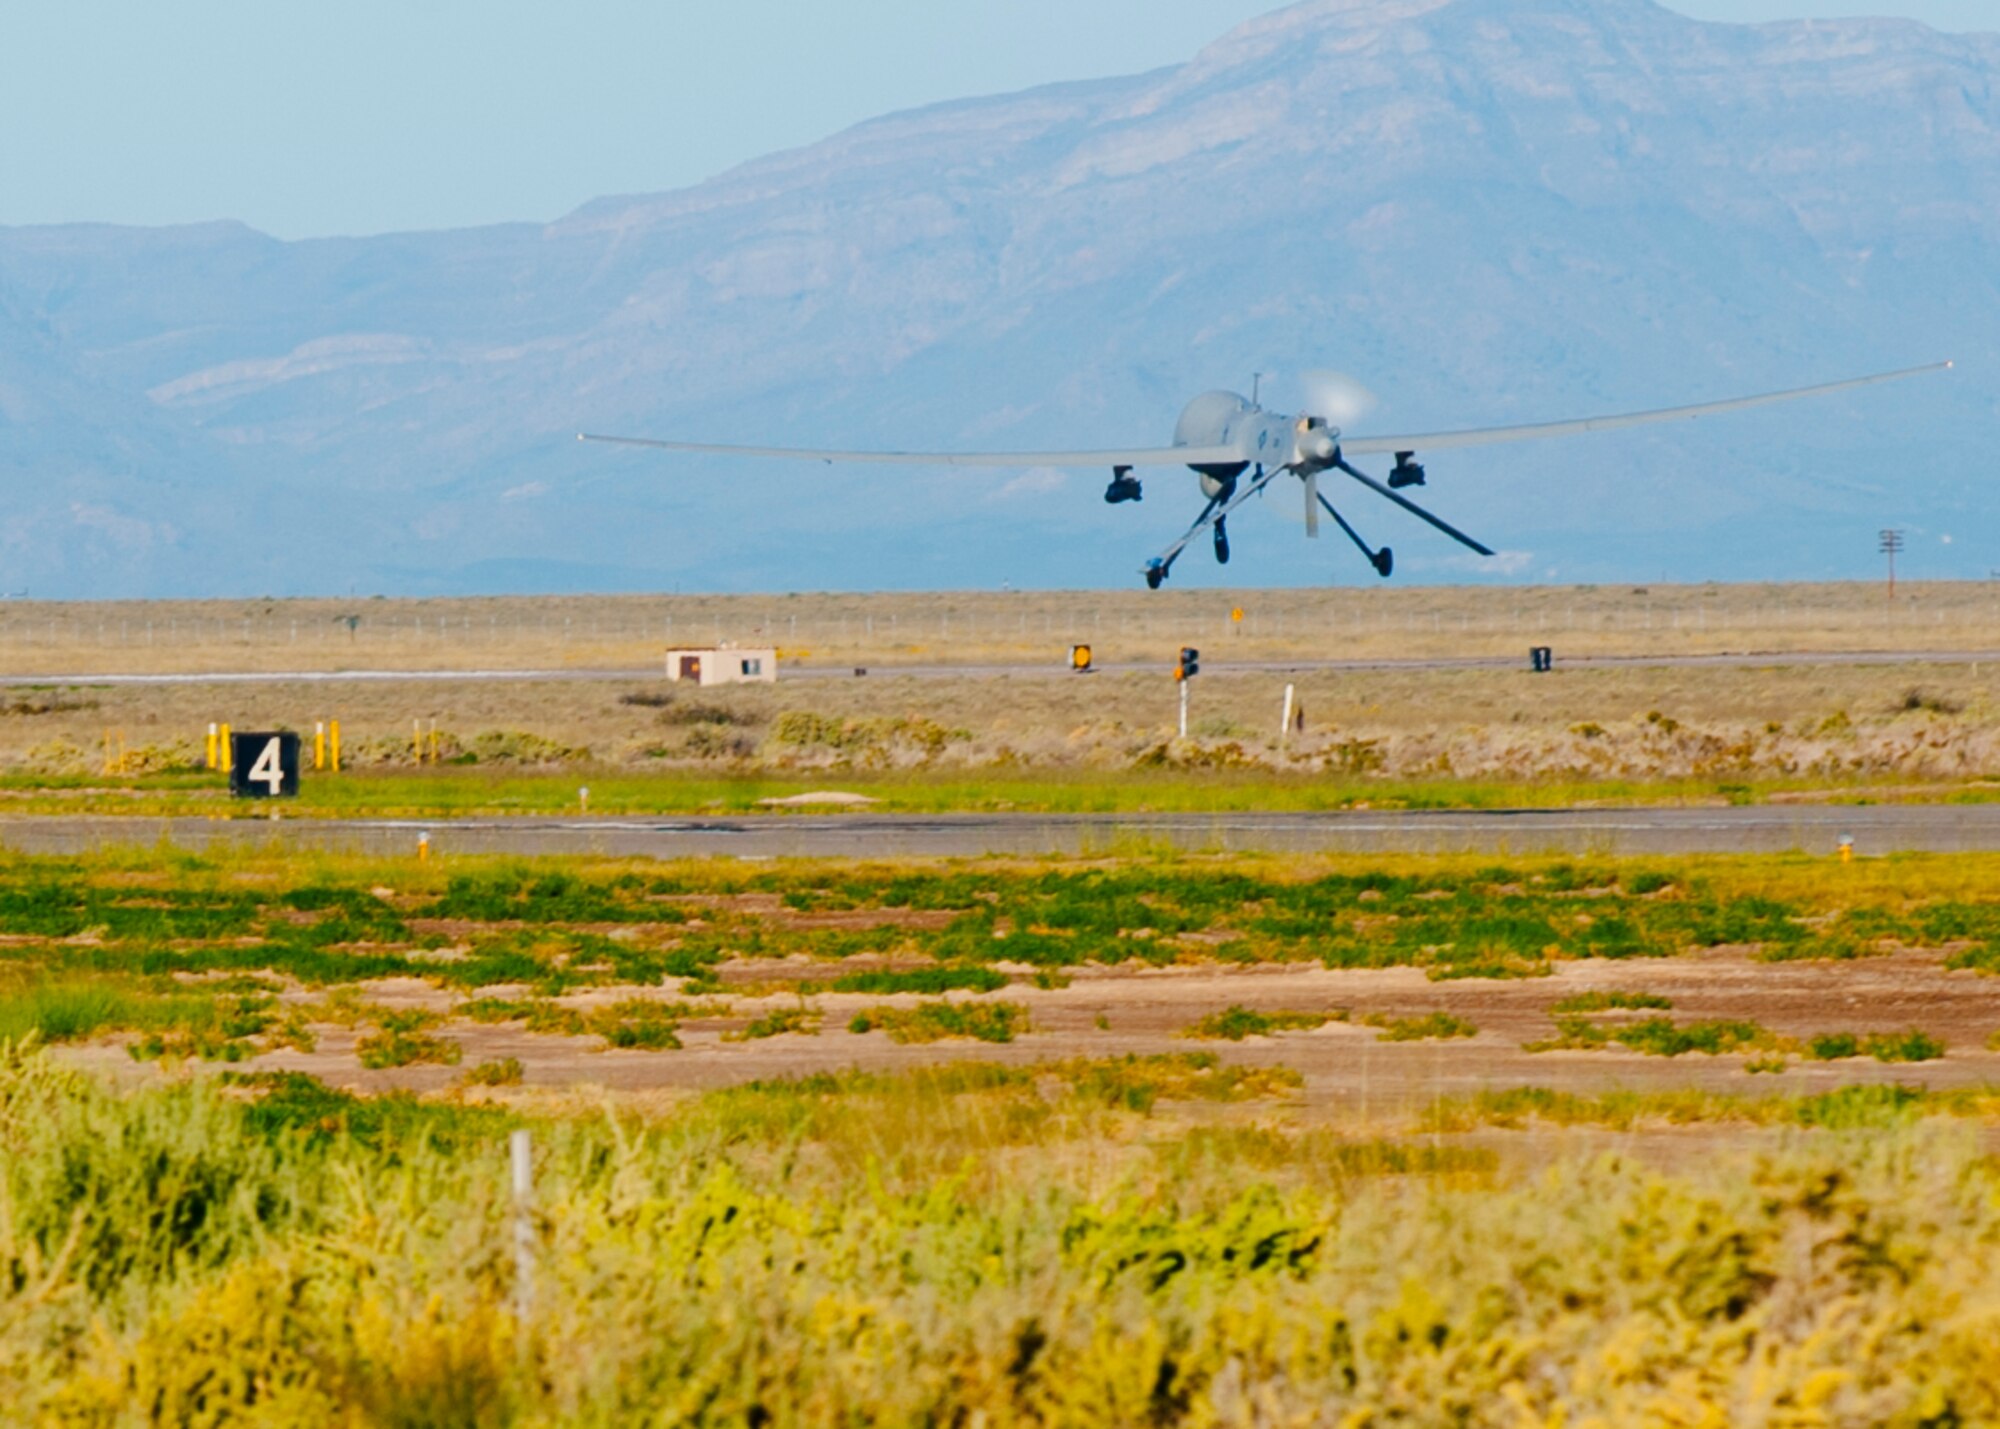 An MQ-1 Predator takes off the runway at Holloman Air Force Base, N.M., Sept. 25. The Predator’s primary functions are to fulfill reconnaissance and forward observation roles.  In addition to the pilot and sensor operator who control the aircraft from a ground control station, flying an MQ-1 requires a culmination of efforts from various squadrons. (U.S. Air Force photo by Airman 1st Daniel E. Liddicoet/Released)